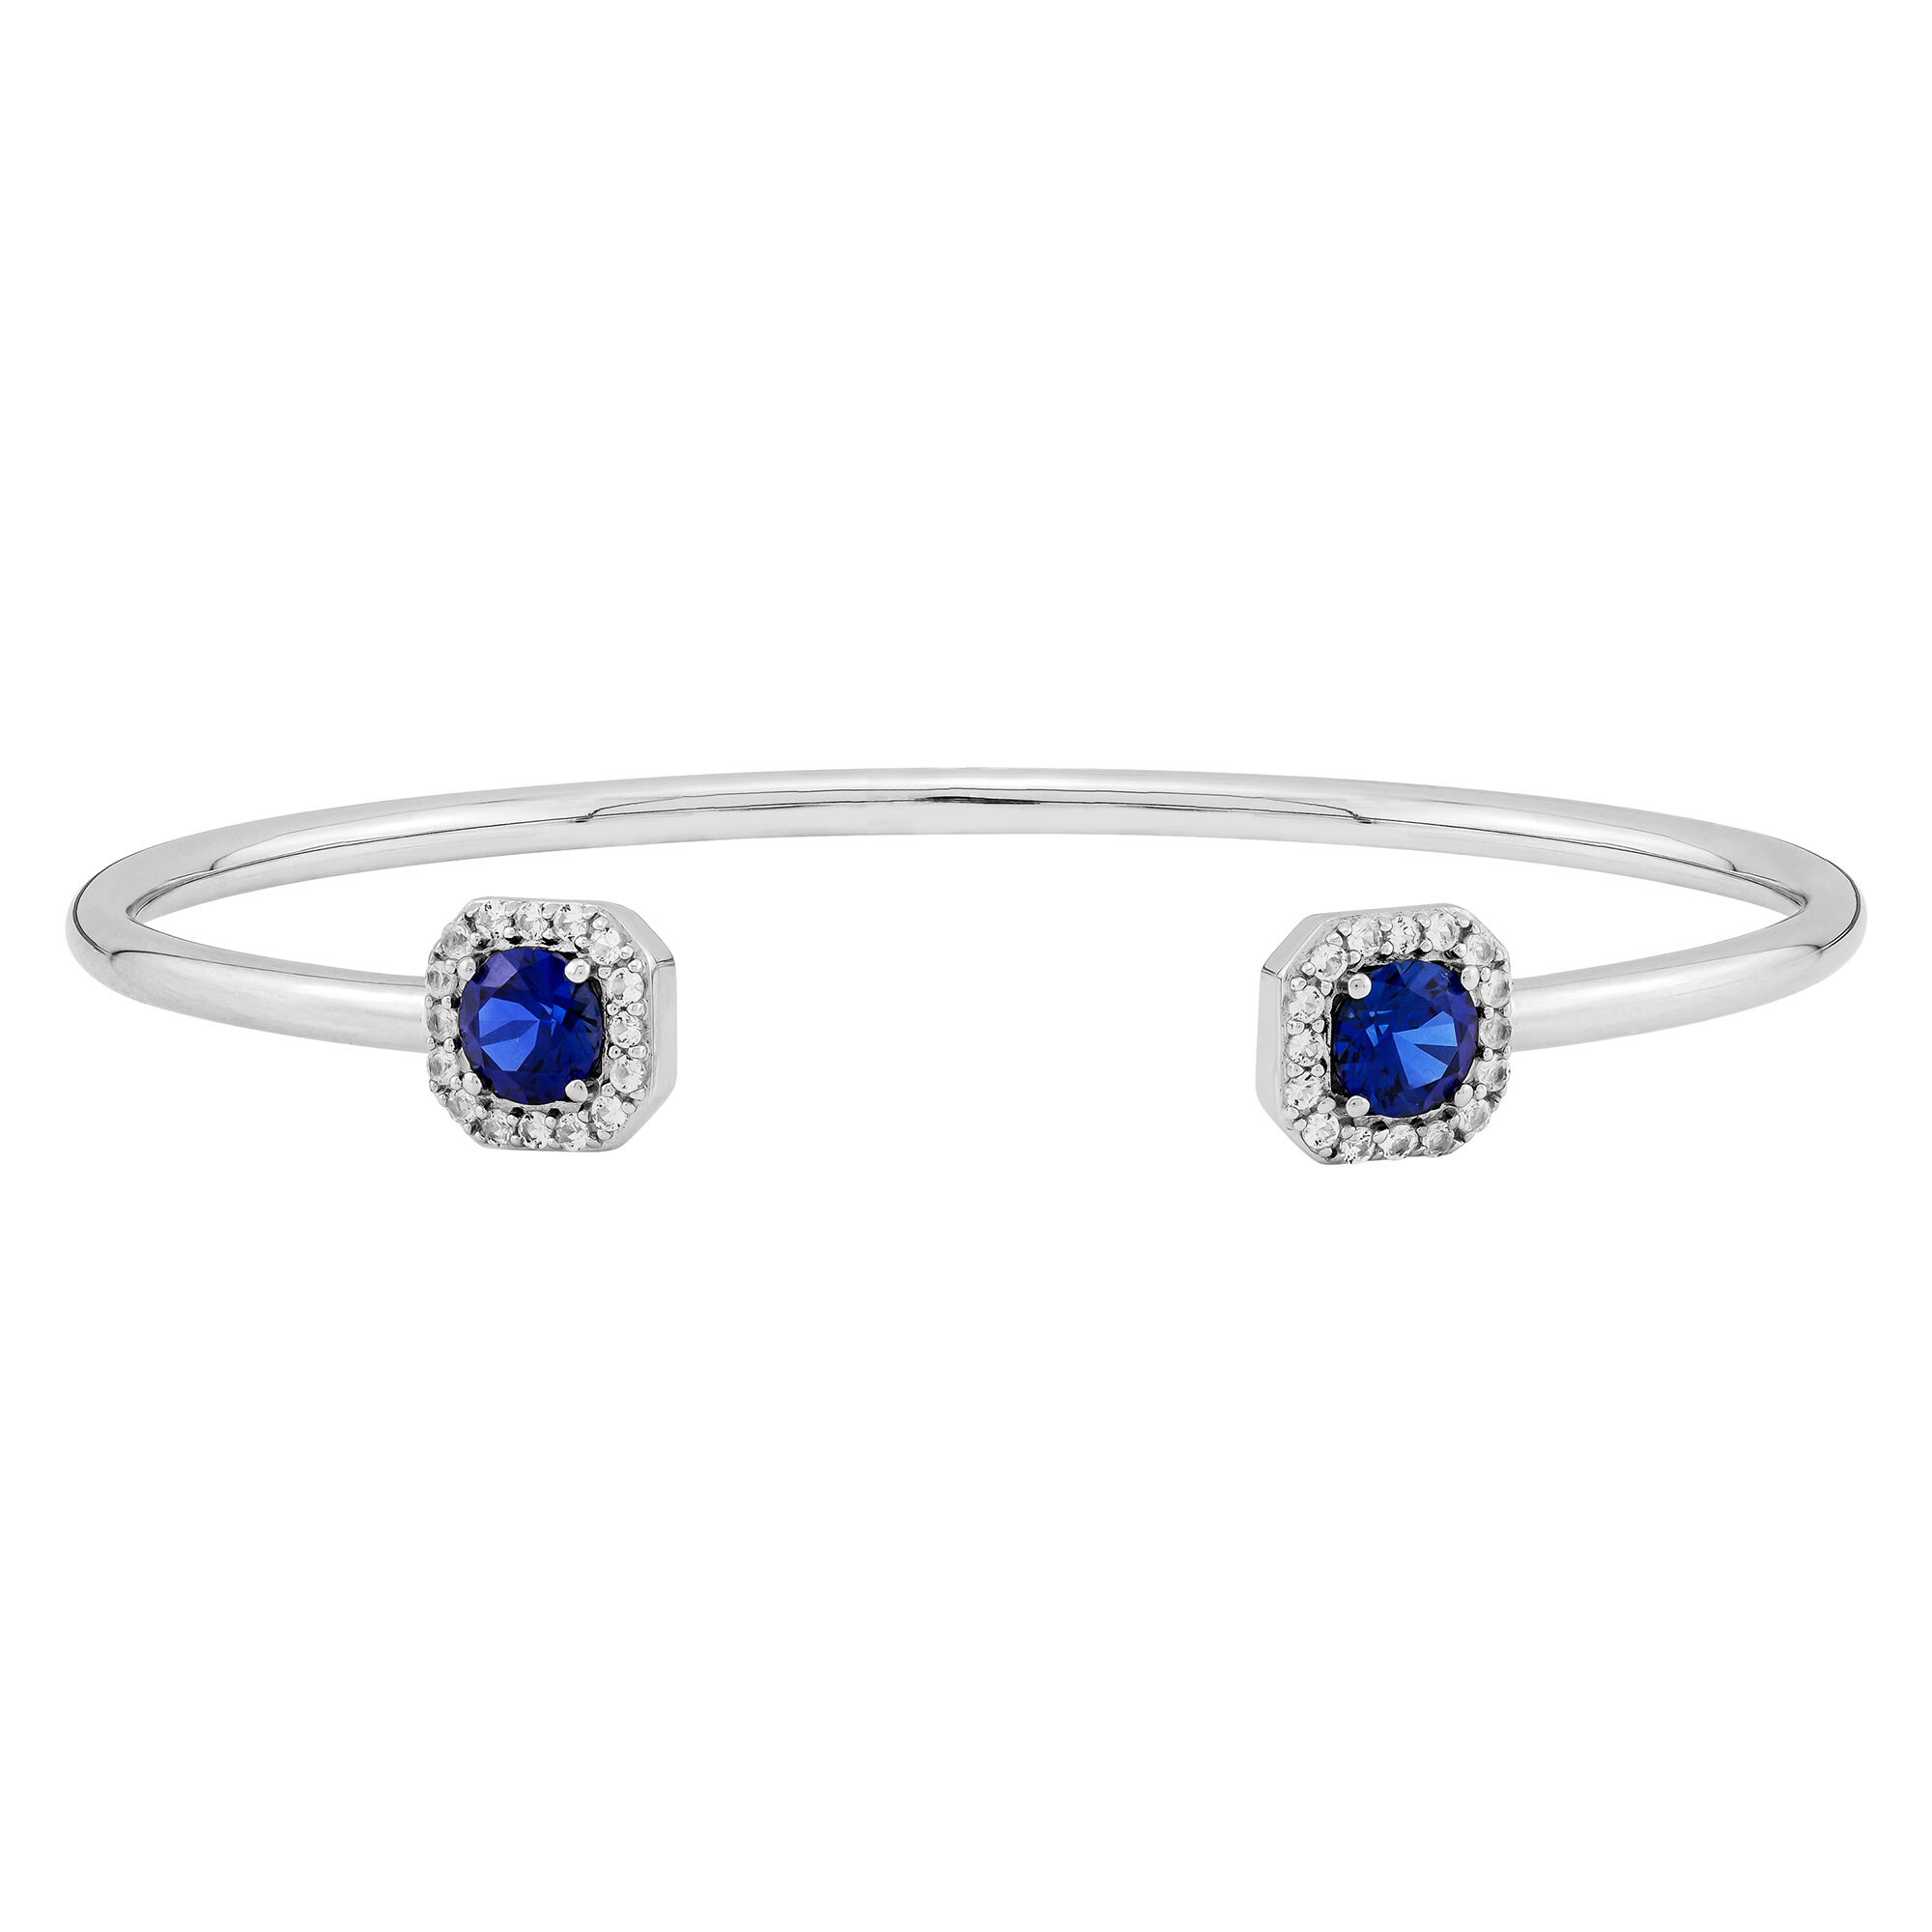 5.0mm White Lab-Created Sapphire Tennis Bracelet in Sterling Silver - 7.5